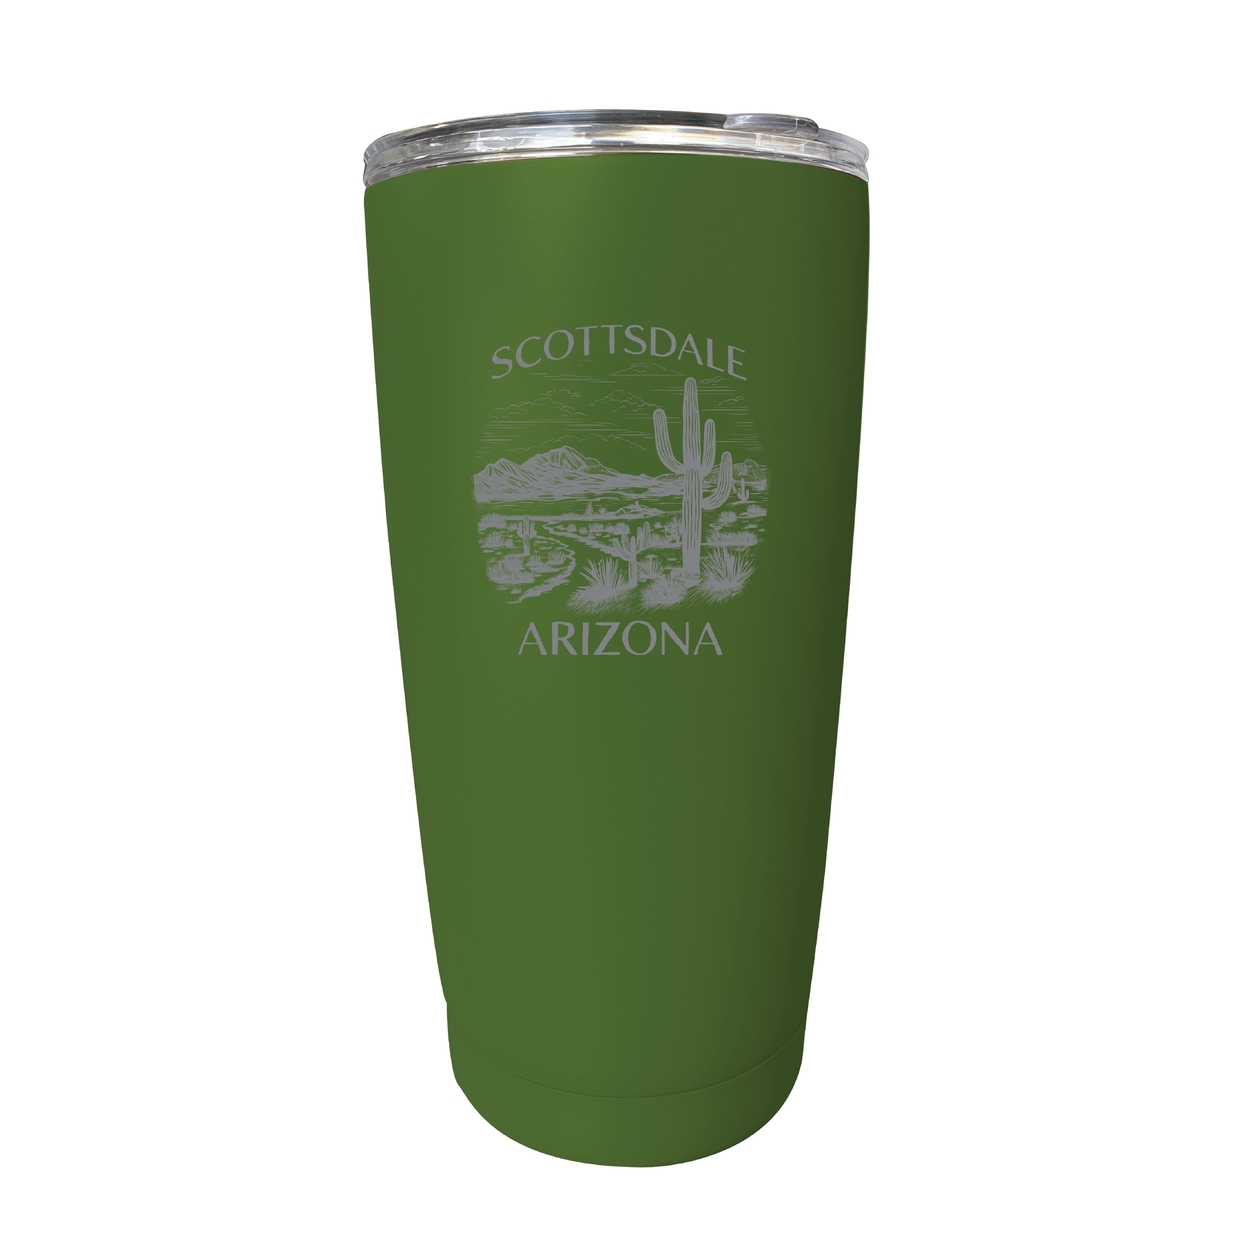 Scottsdale Arizona Souvenir 16 Oz Engraved Stainless Steel Insulated Tumbler - Green,,4-Pack